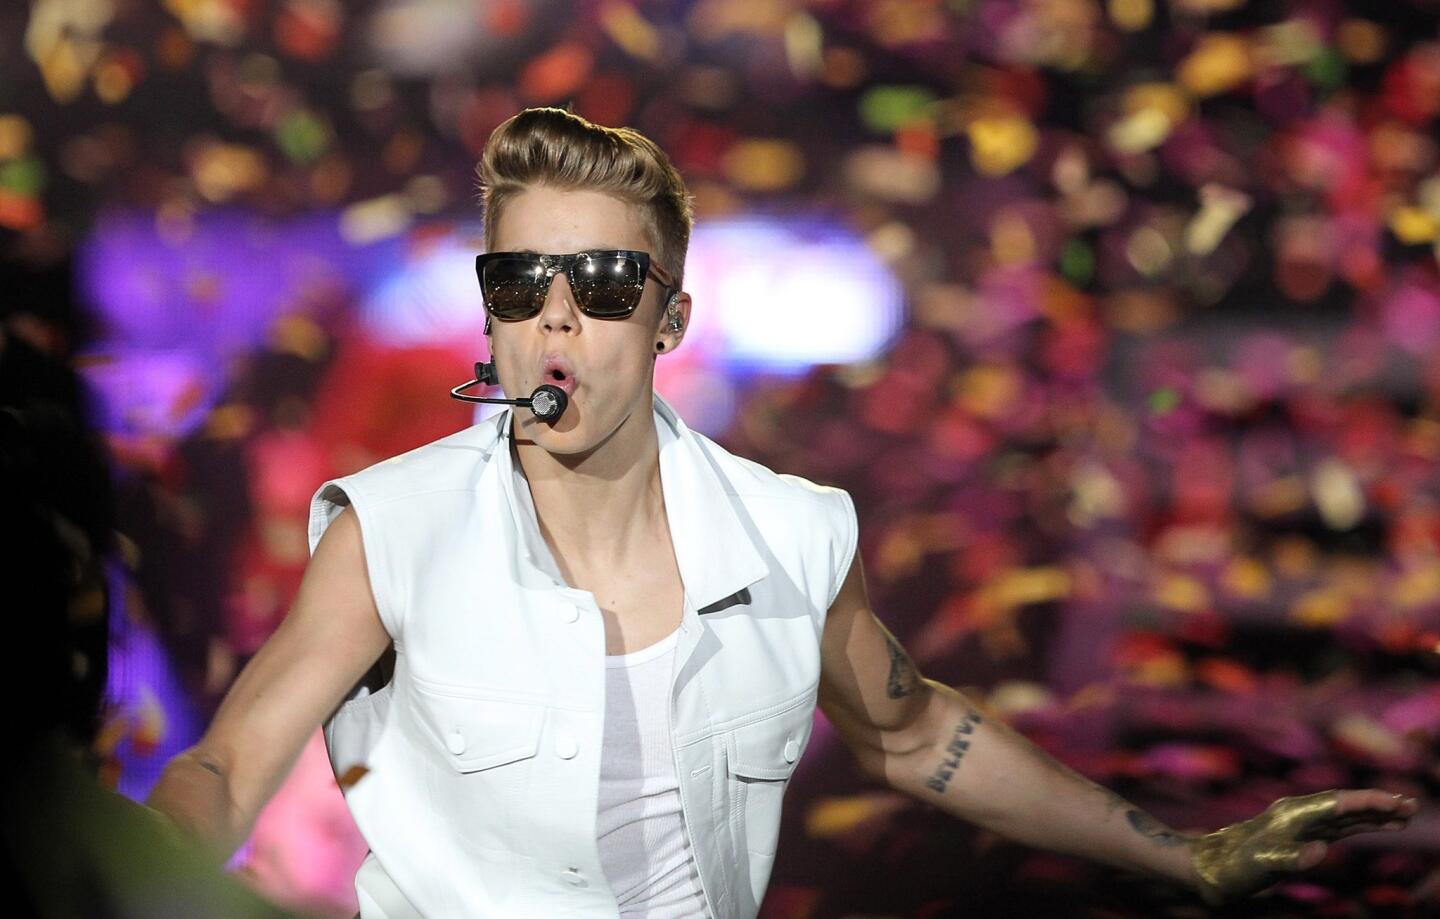 Justin Bieber attacked by a fan in Dubai; show goes on